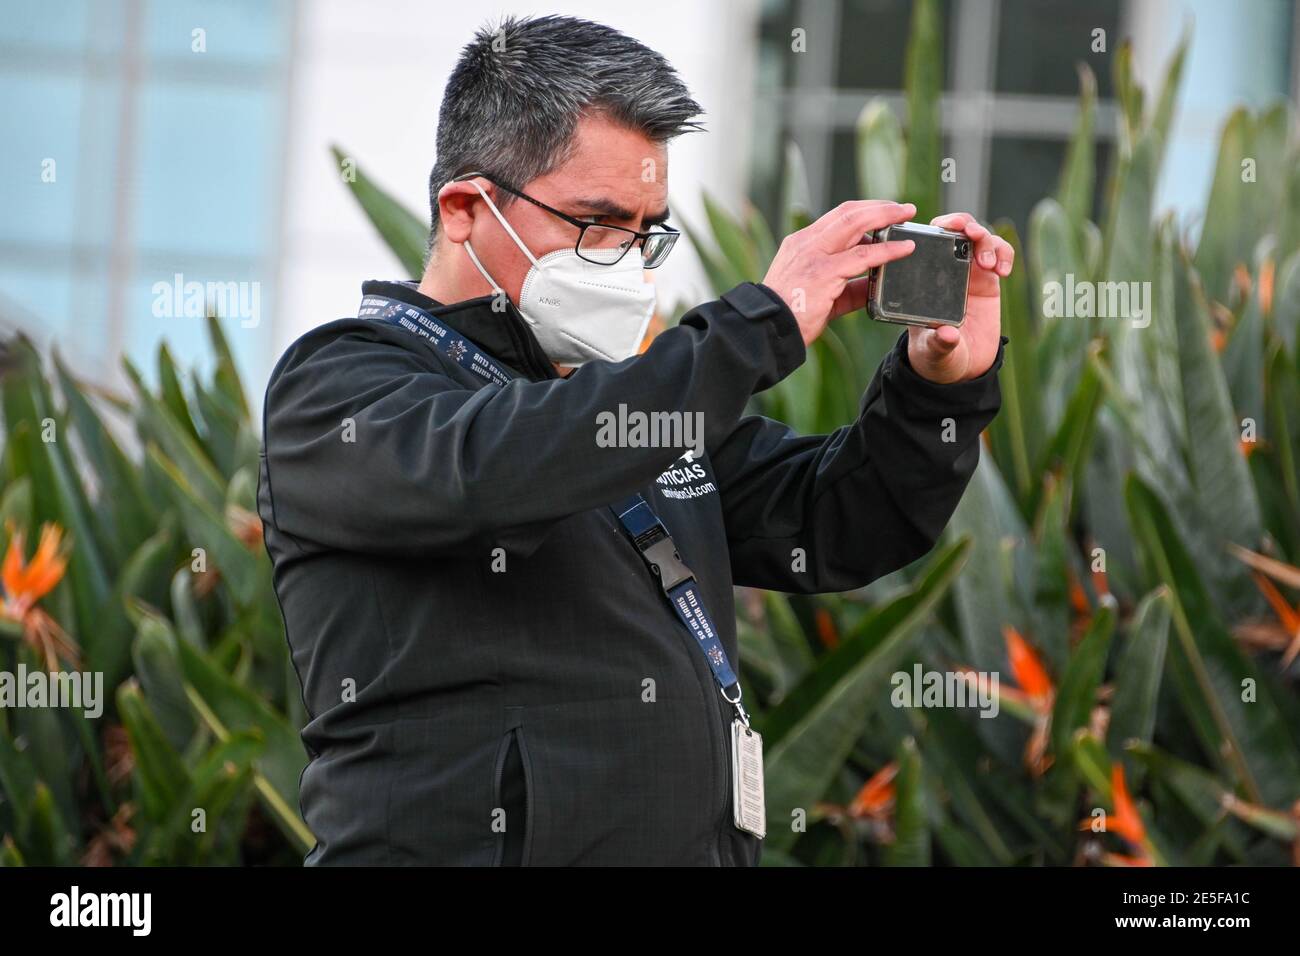 Univision reporter Armando Aguilera observes at a memorial for Kobe Bryant and daughter Gianna near Staples Center, Tuesday, Jan. 26, 2021, in Los Ang Stock Photo